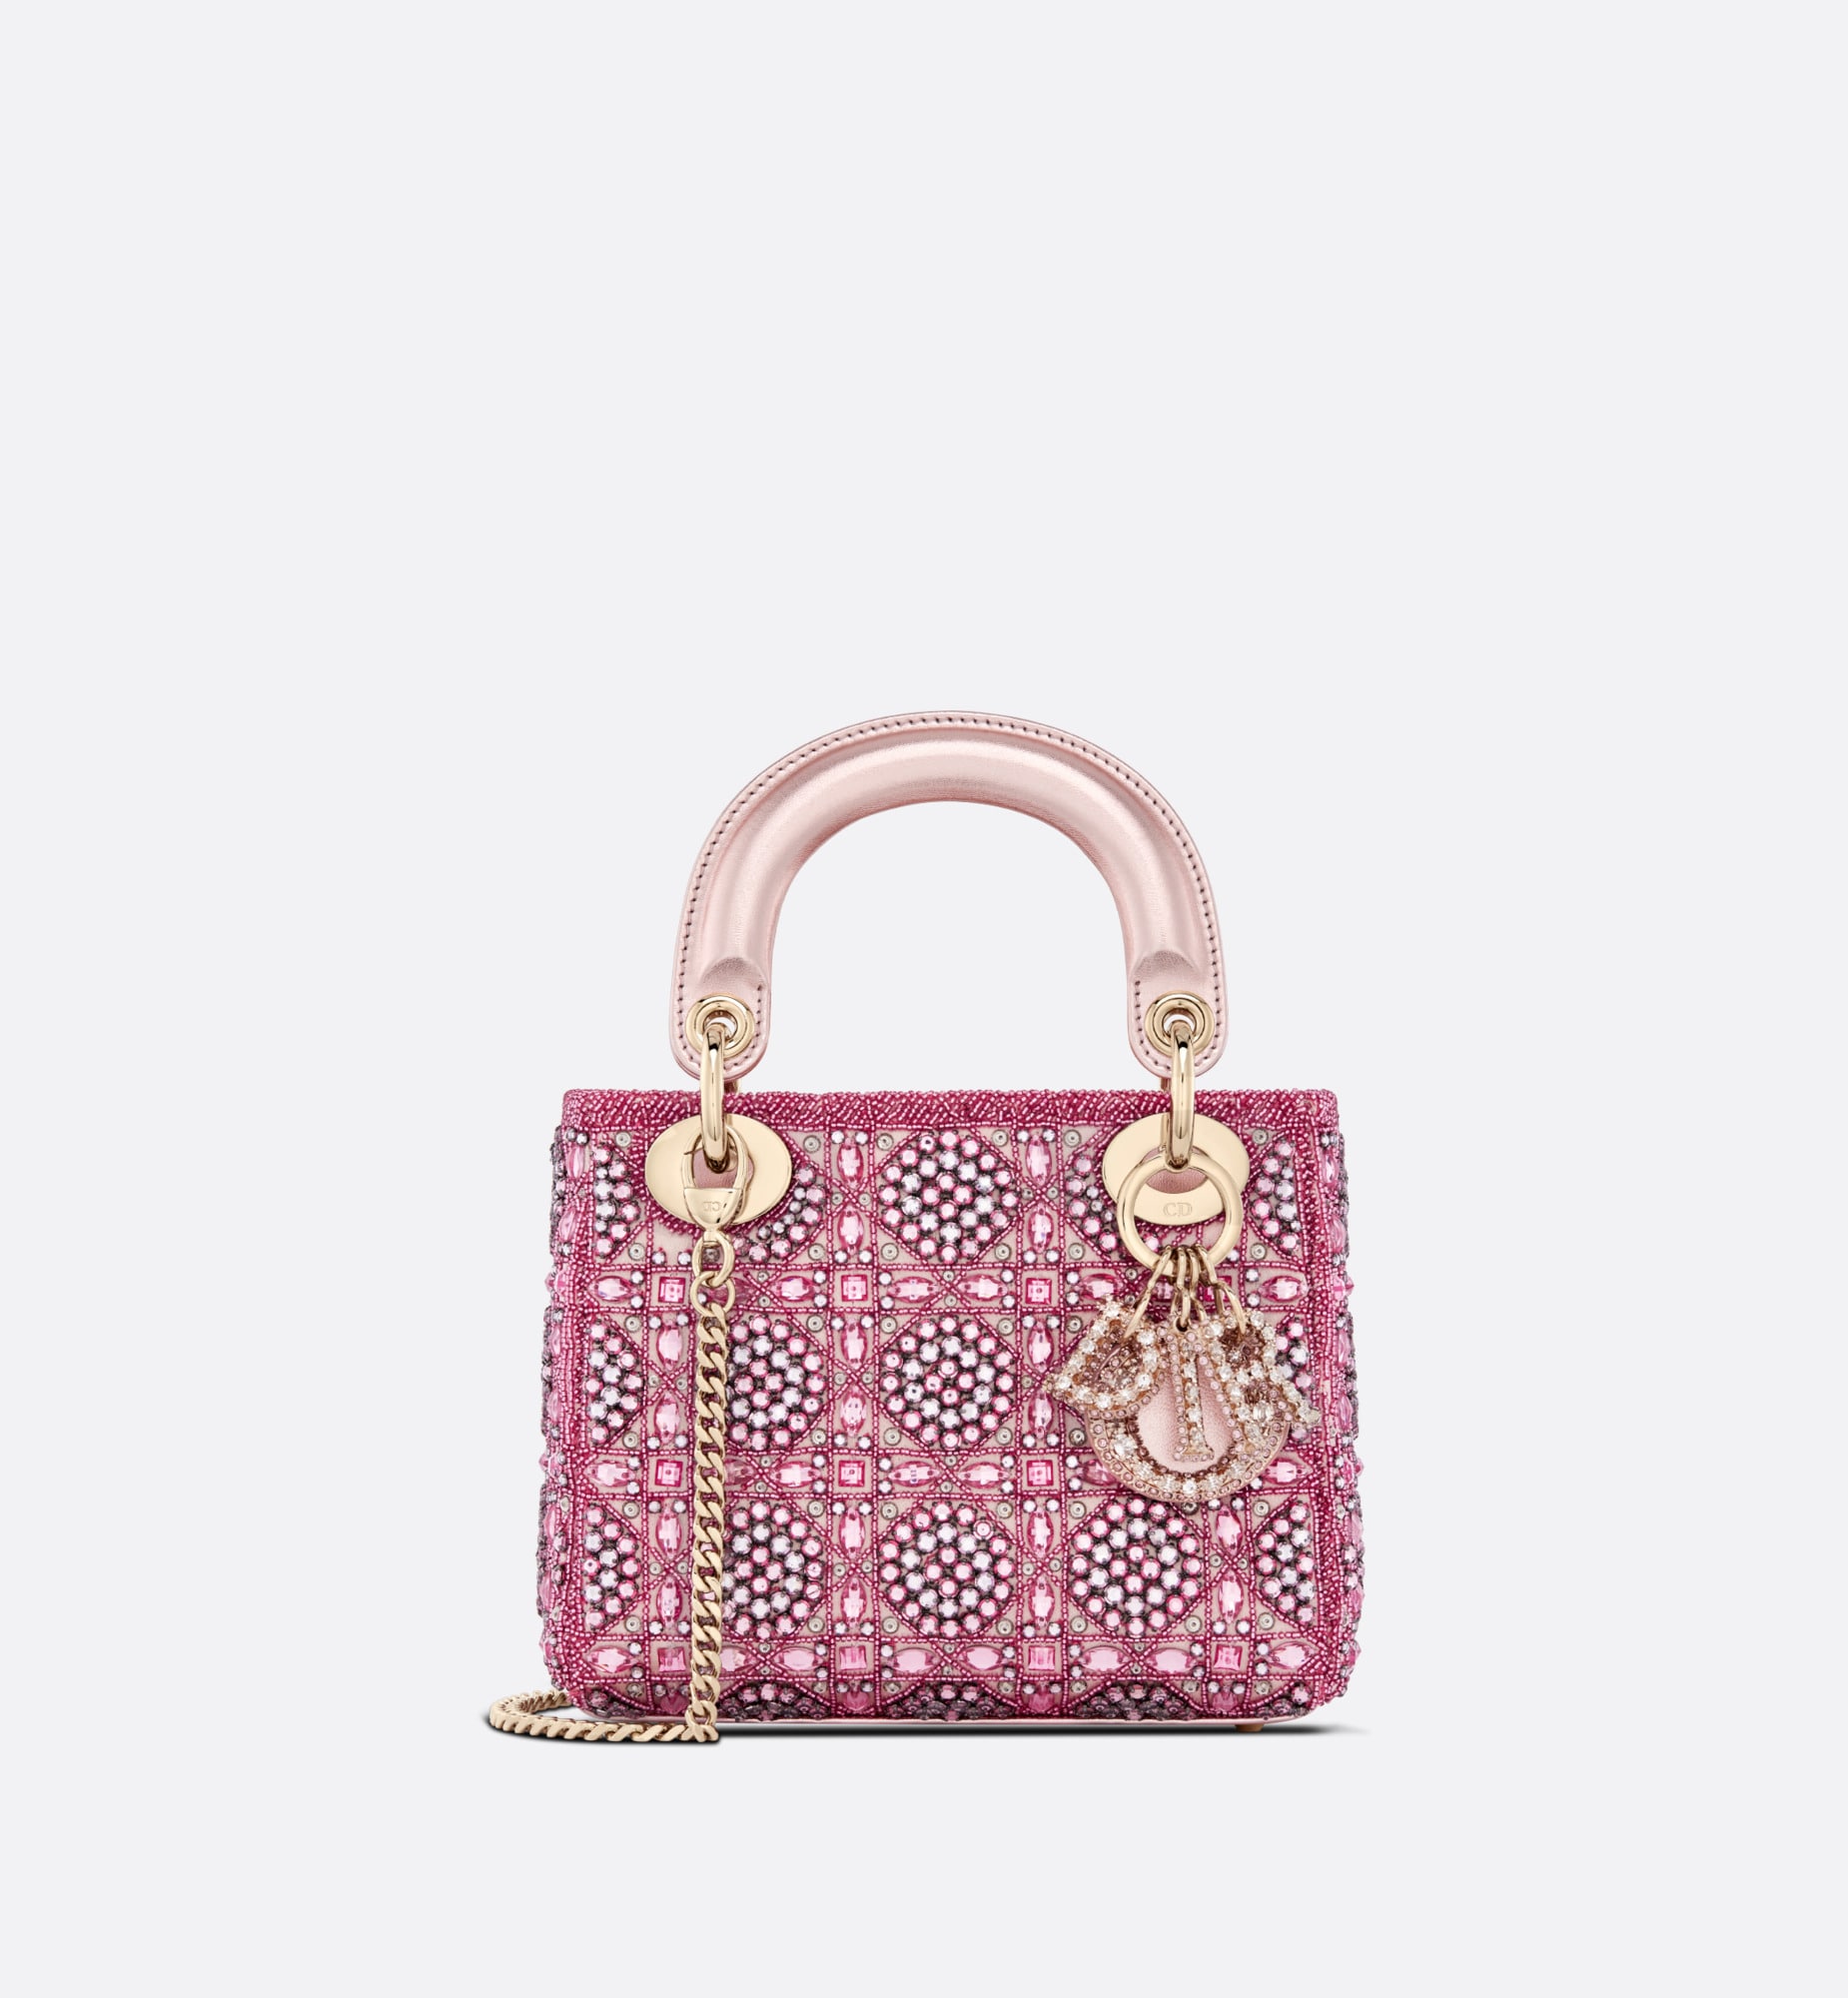 Mini lady dior bag metallic calfskin and satin with rose des vents resin pearl embroidery